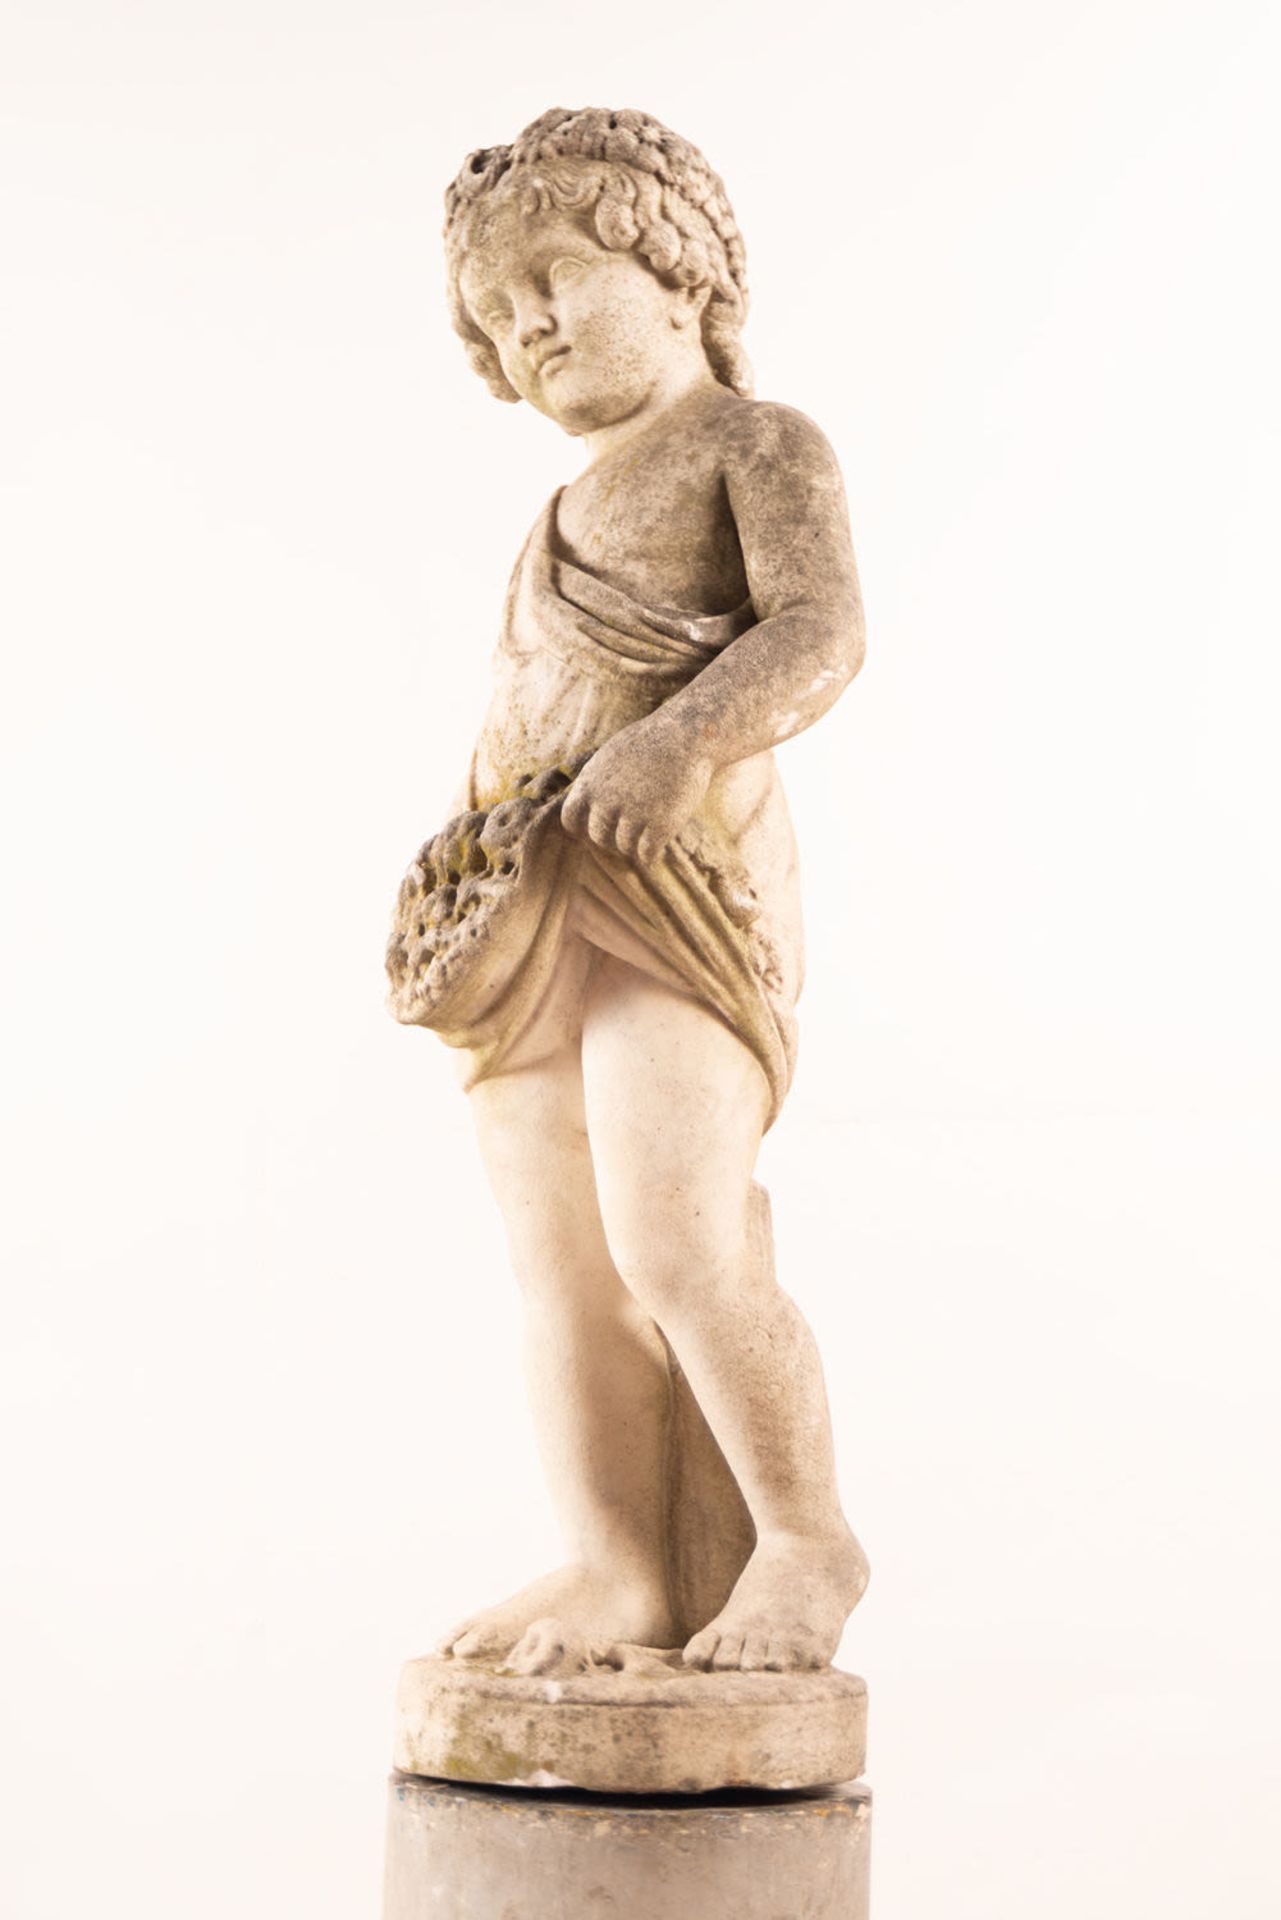 Large Cherub Figure in Marble, France, 18th century - Image 12 of 14